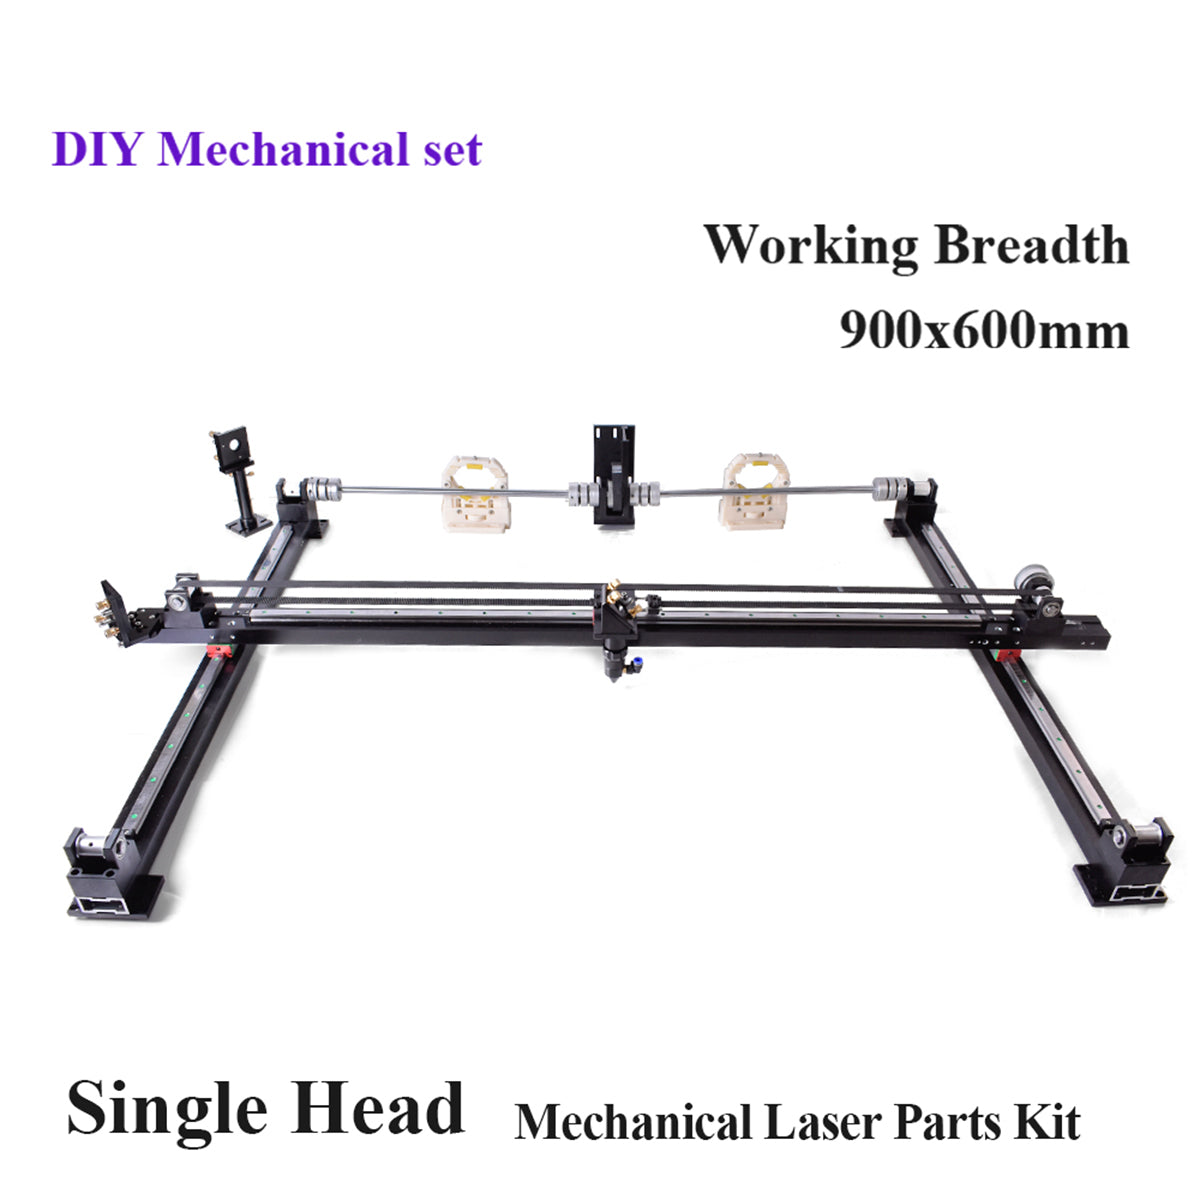 Startnow DIY CO2 Laser Metal Parts 900mmx600mm Outer Sliding Rails Kits Single Head XY Axis Mechanical Laser Parts Set